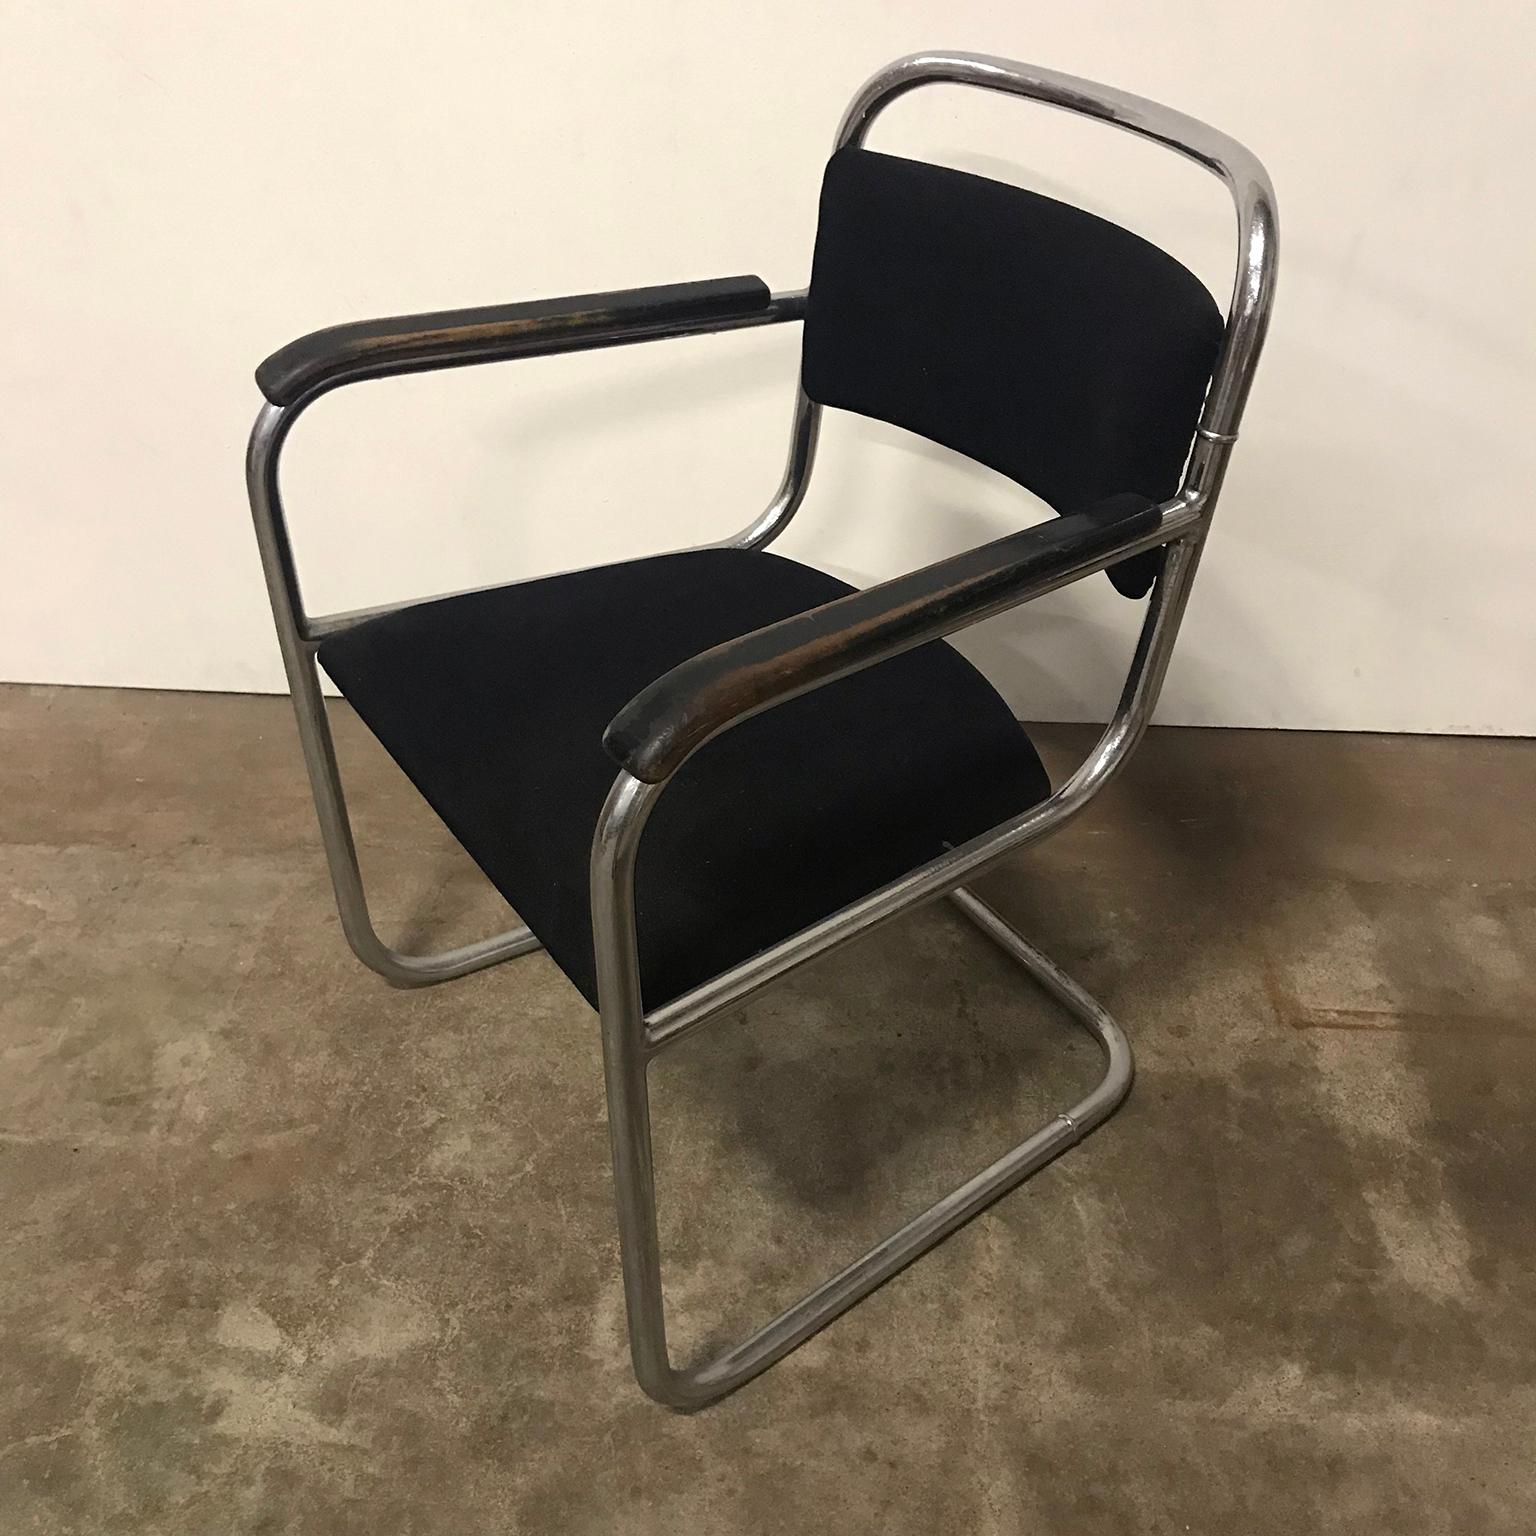 Dutch Design, Set of Original Tubular Chairs with Black Upholstery, circa 1930 For Sale 1